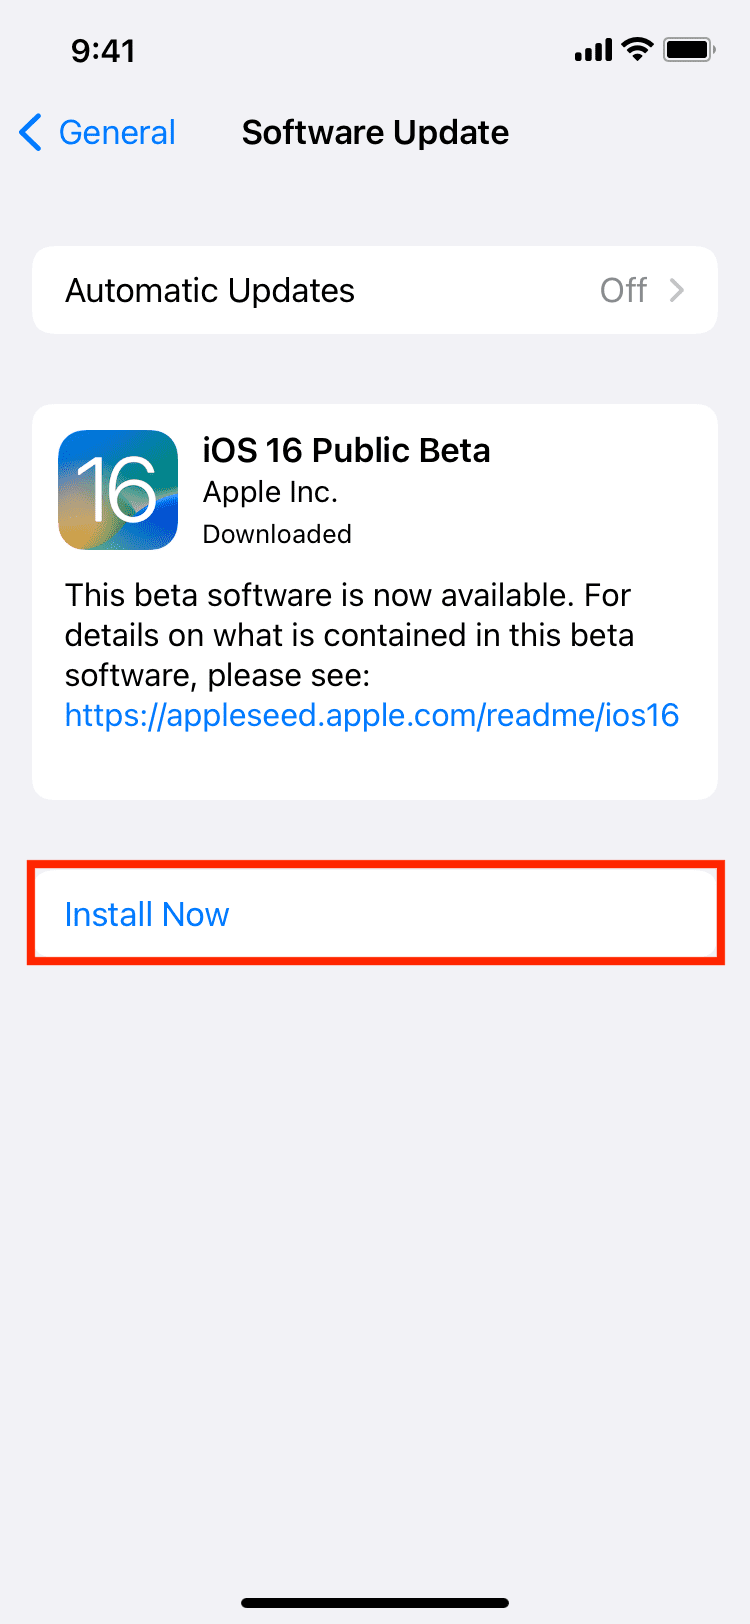 Tap Install Now to get iOS 16 on iPhone